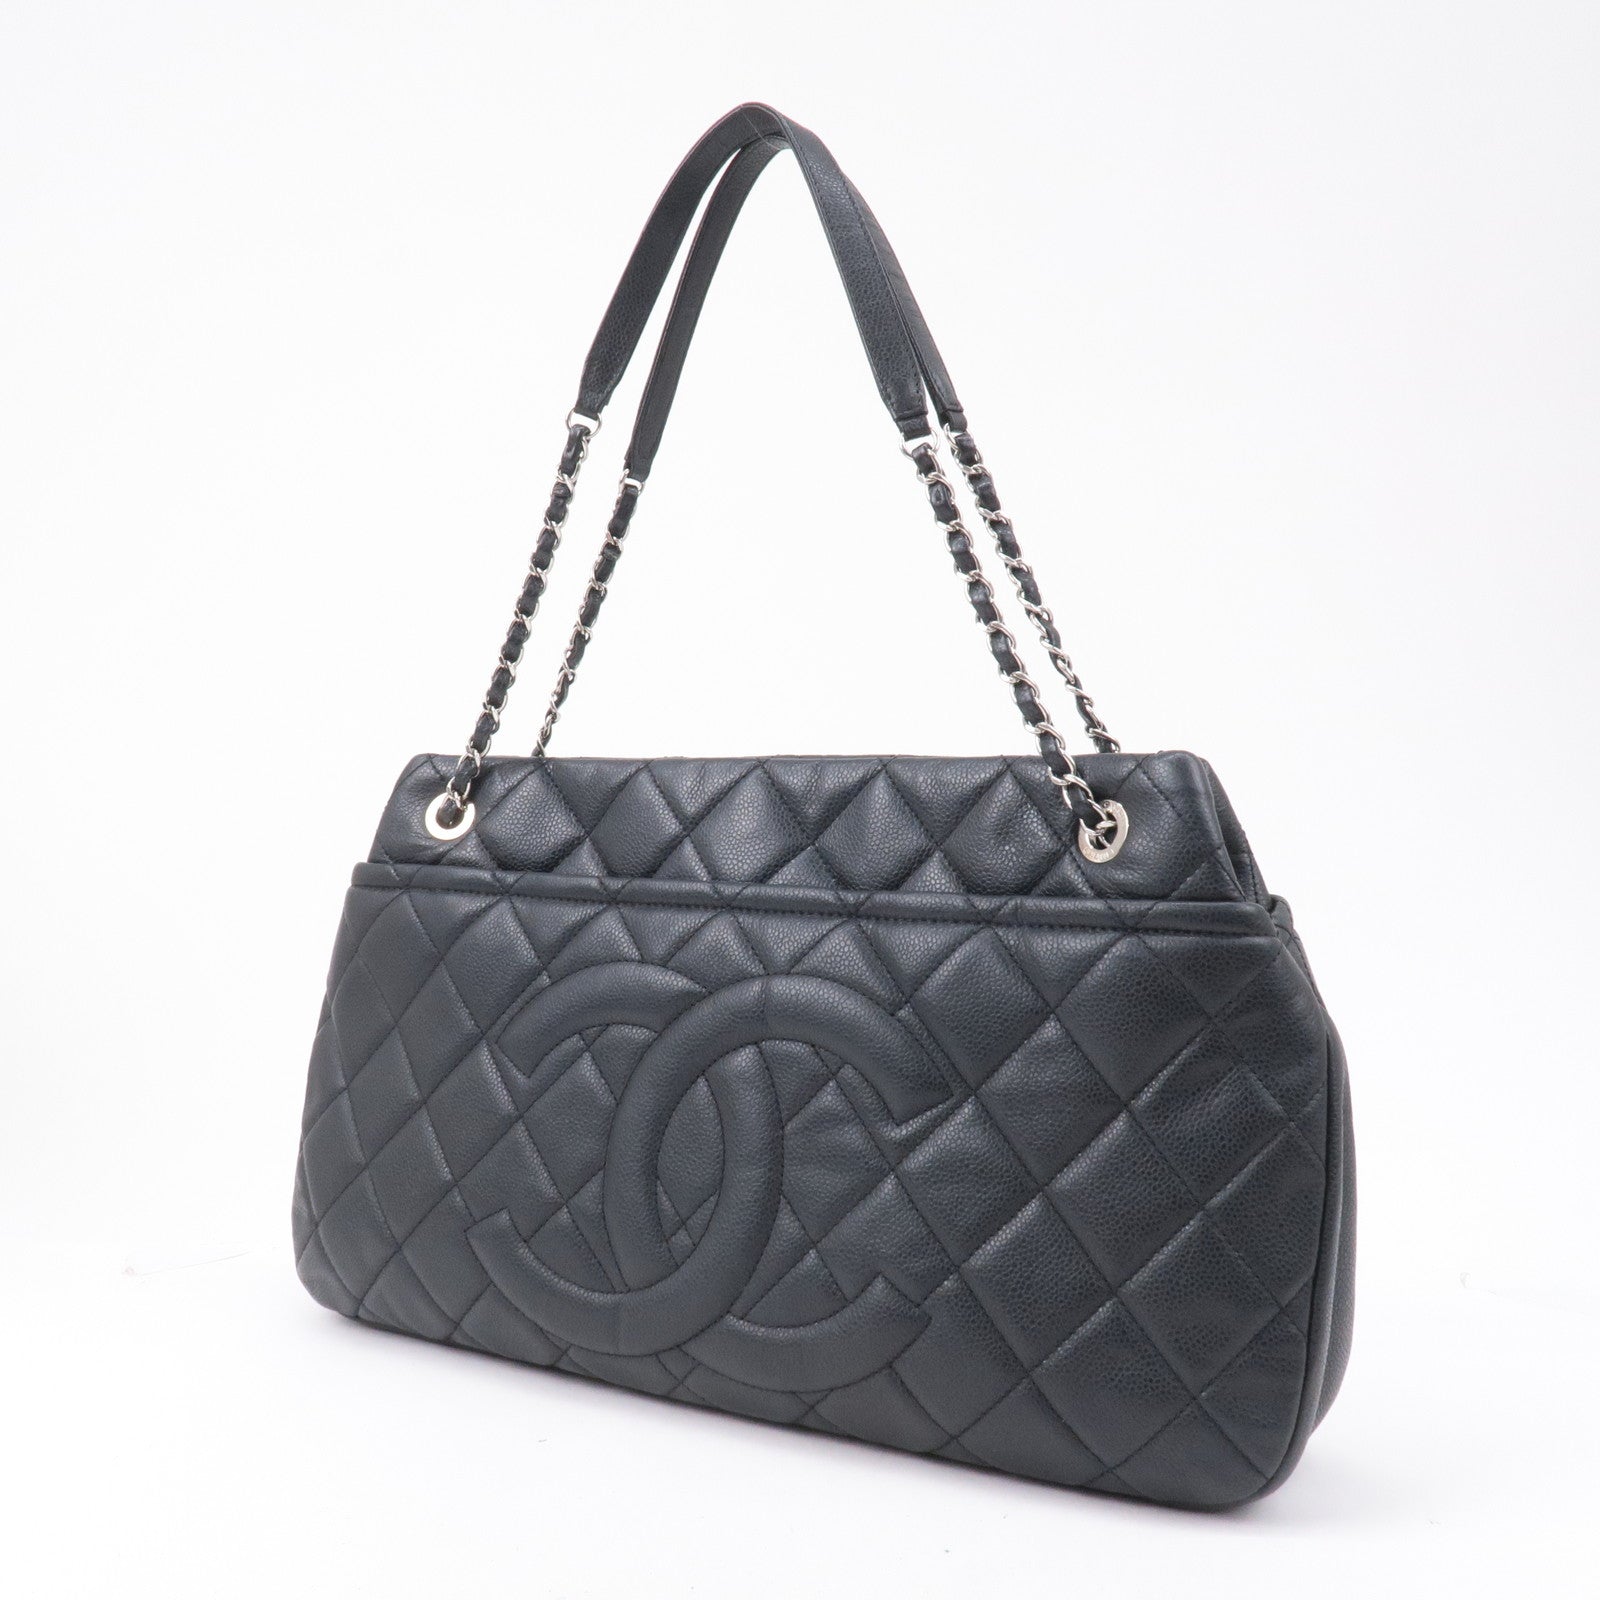 chanel timeless cc soft tote